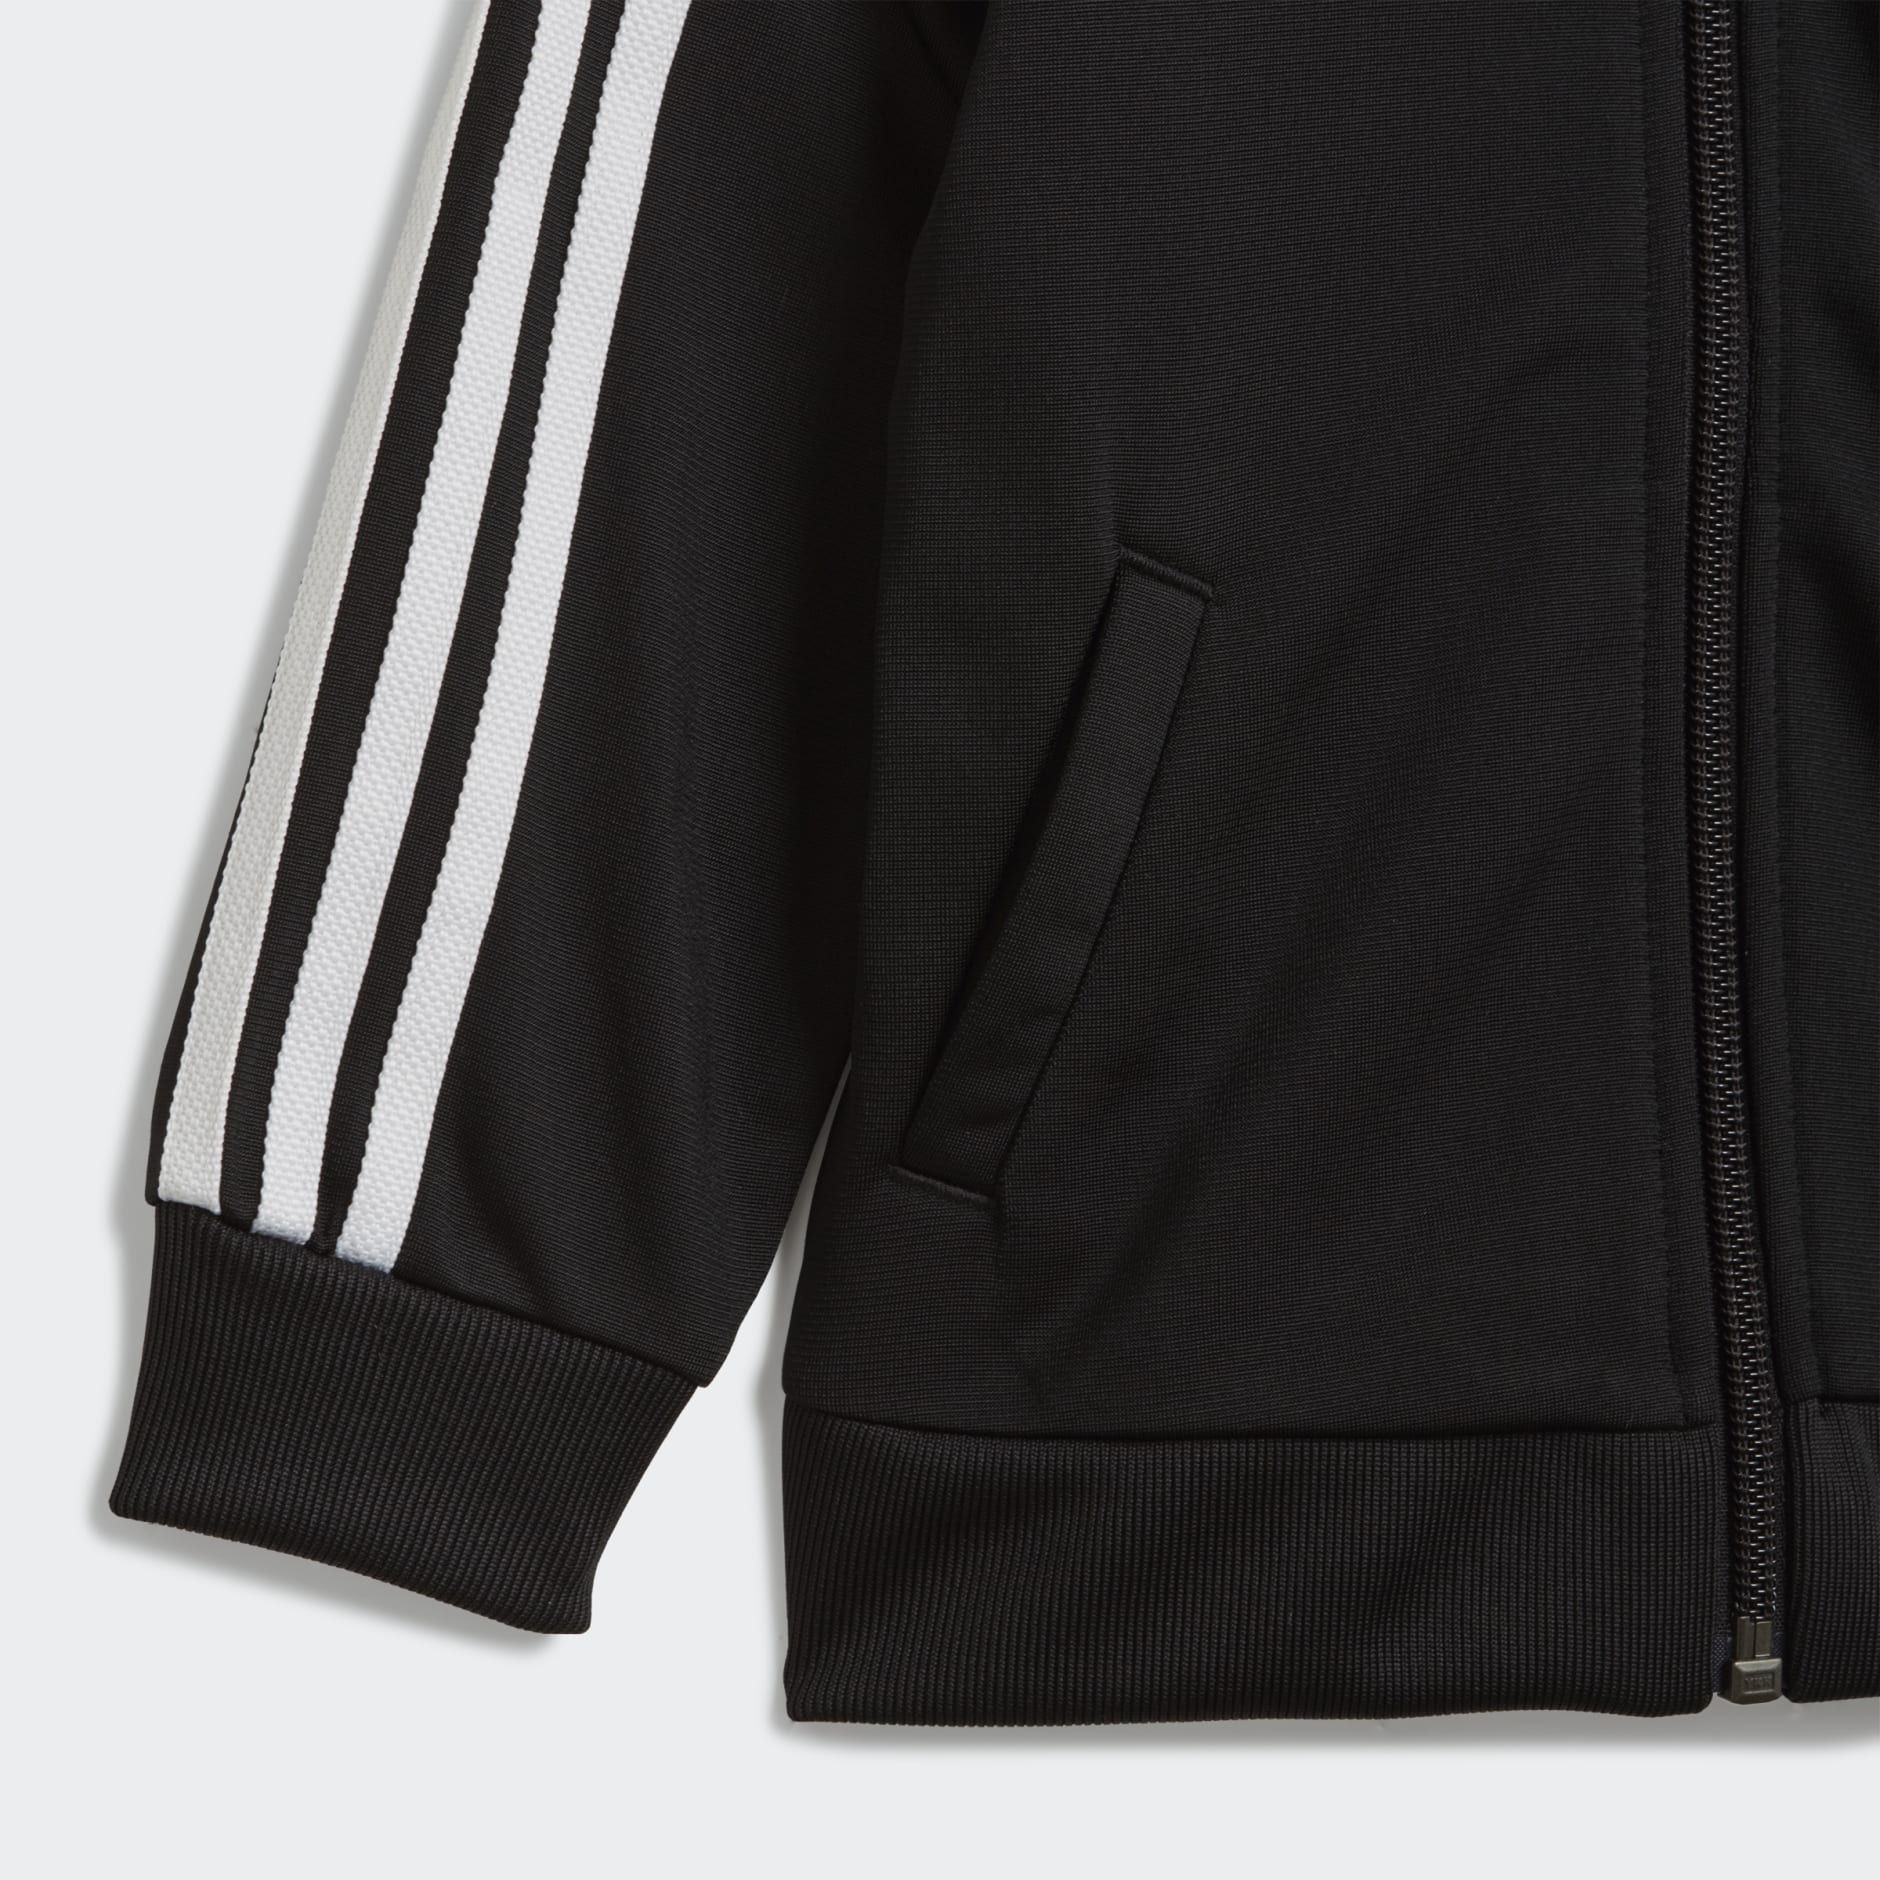 sent Visible write a letter adidas Adicolor SST Track Suit - Black | adidas SA